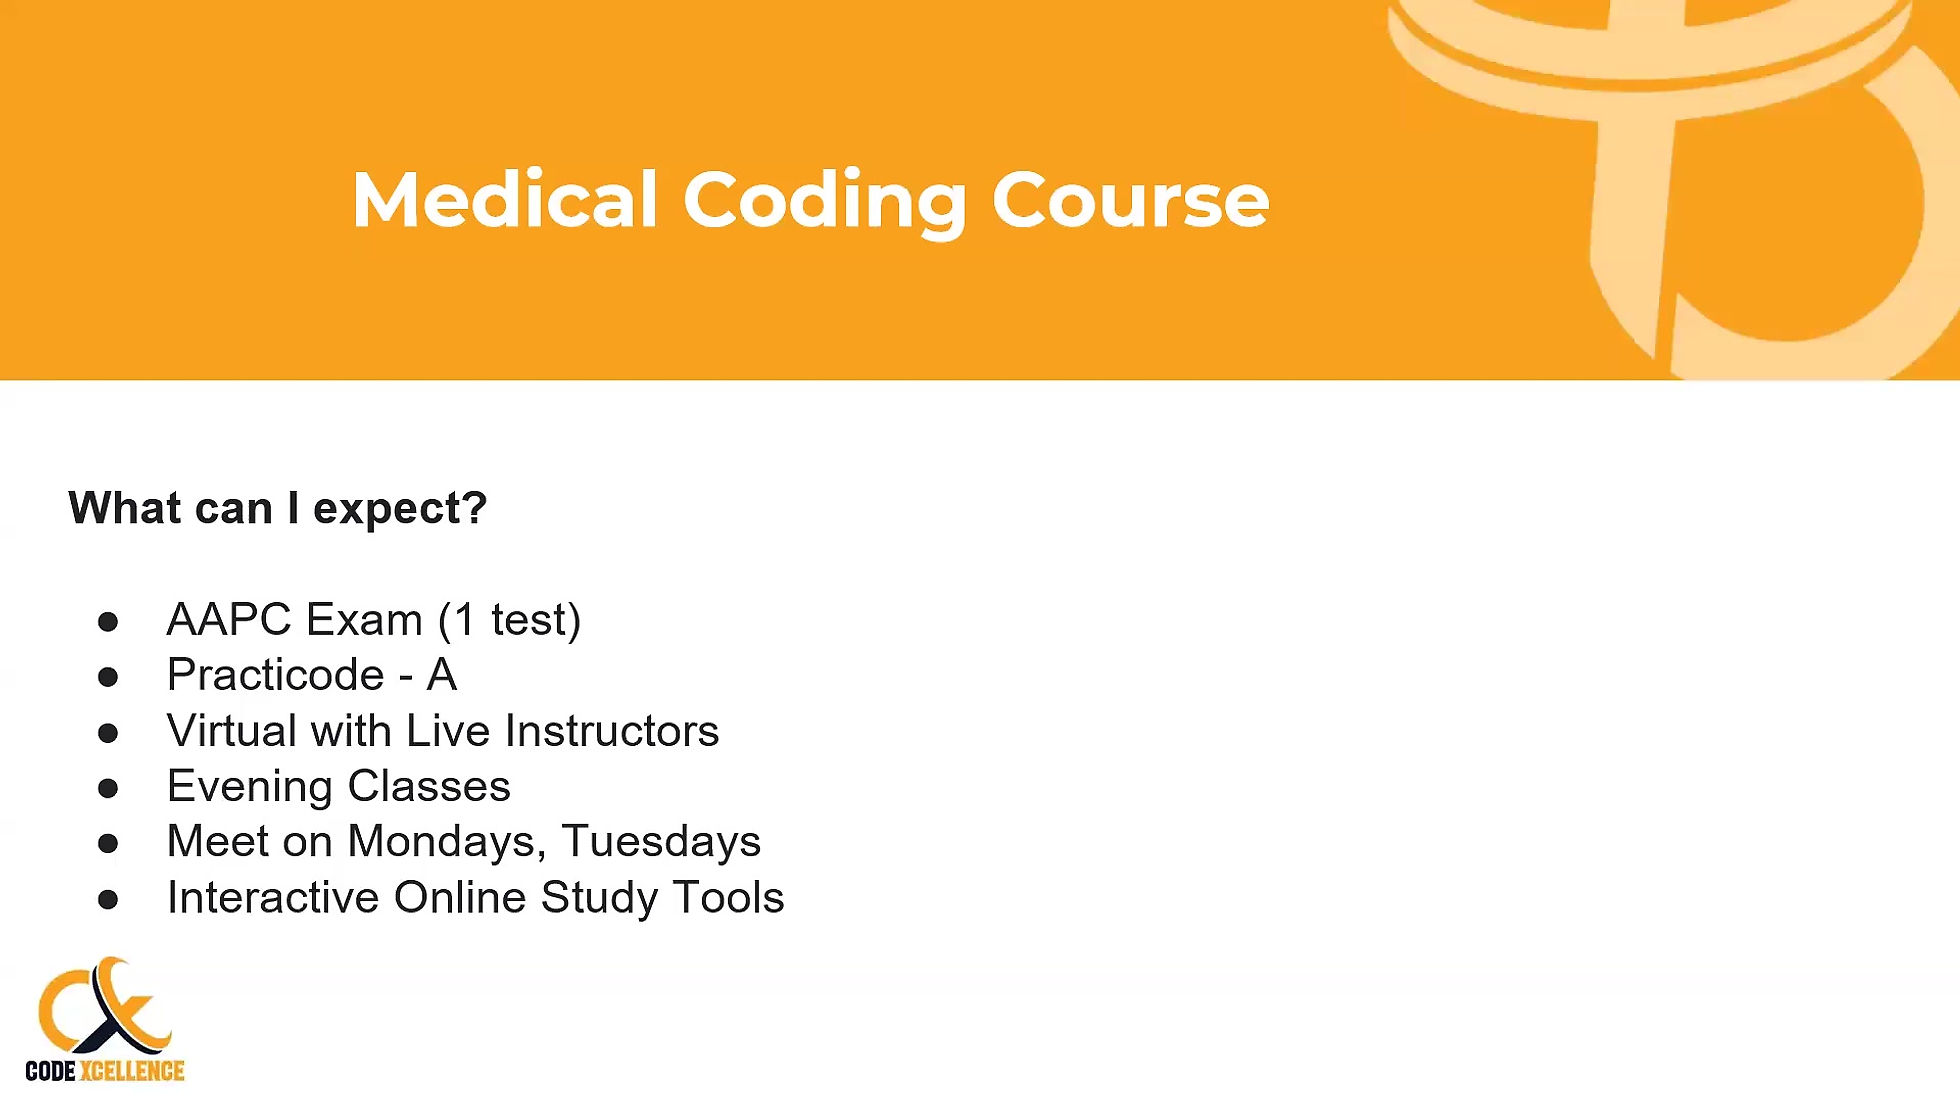 Medical Coding Course Information